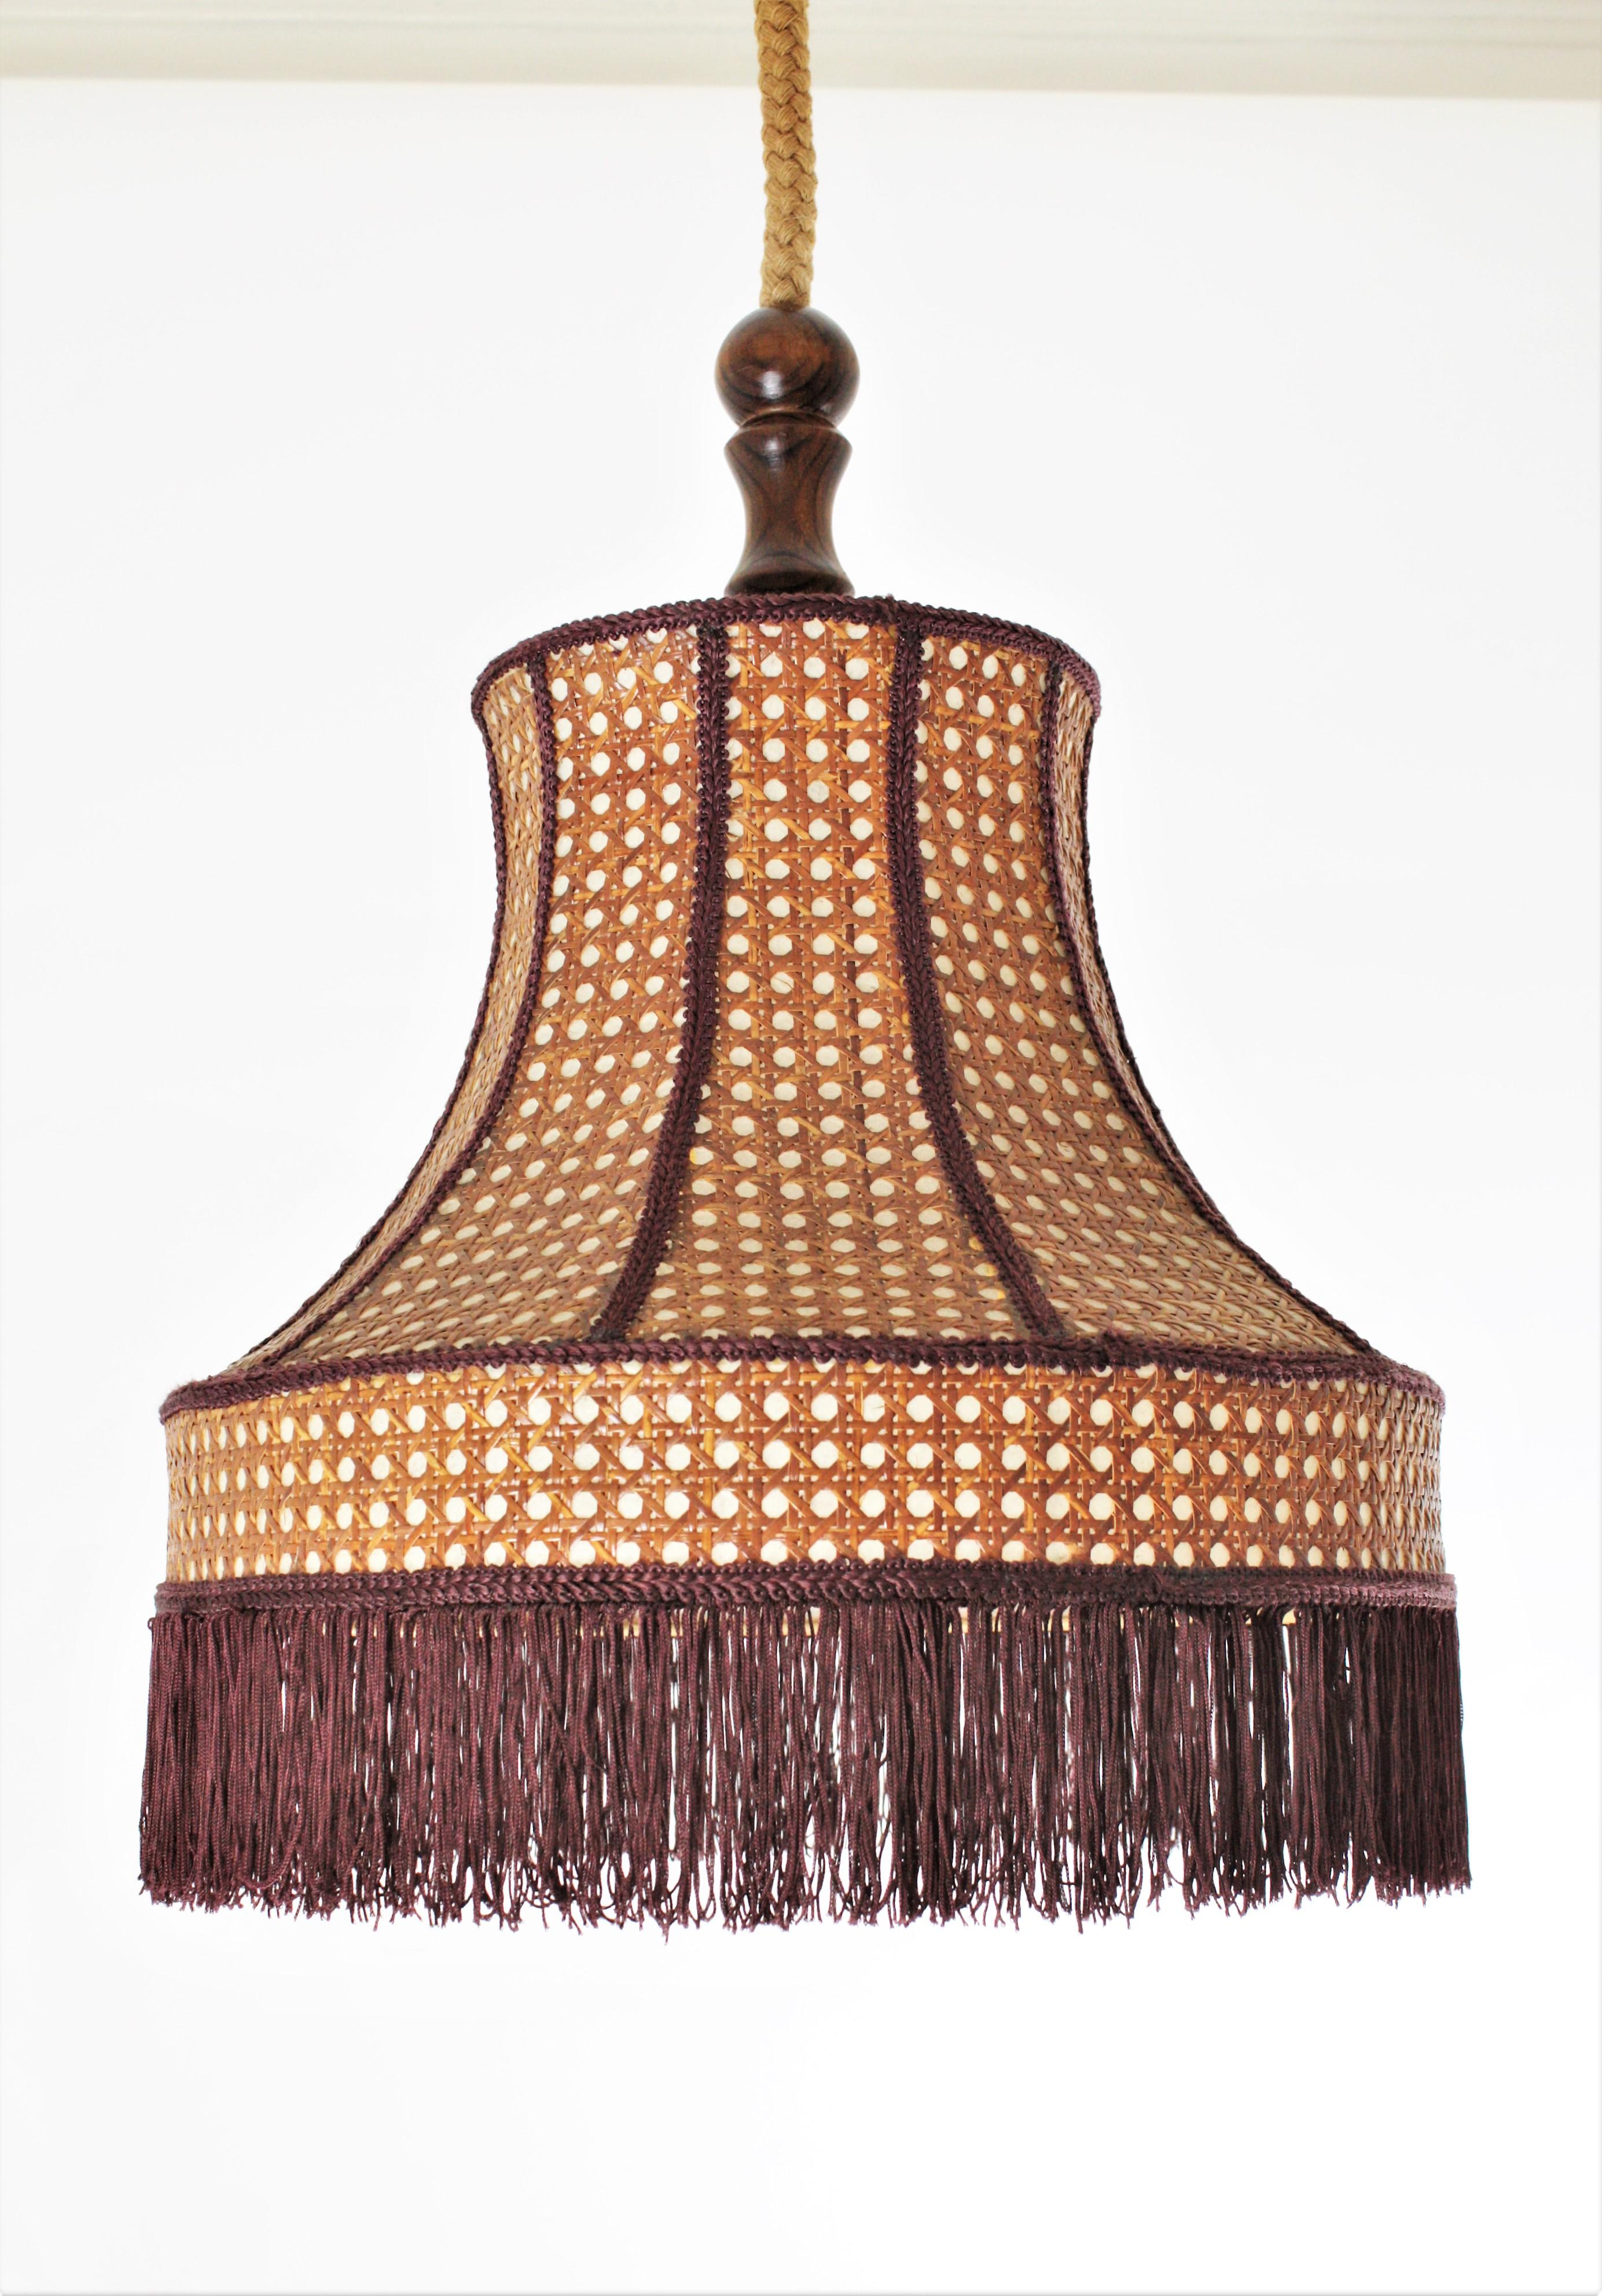 Rattan Wicker Pendant Hanging Lamp with Pagoda Shape and Fringed Bottom 4